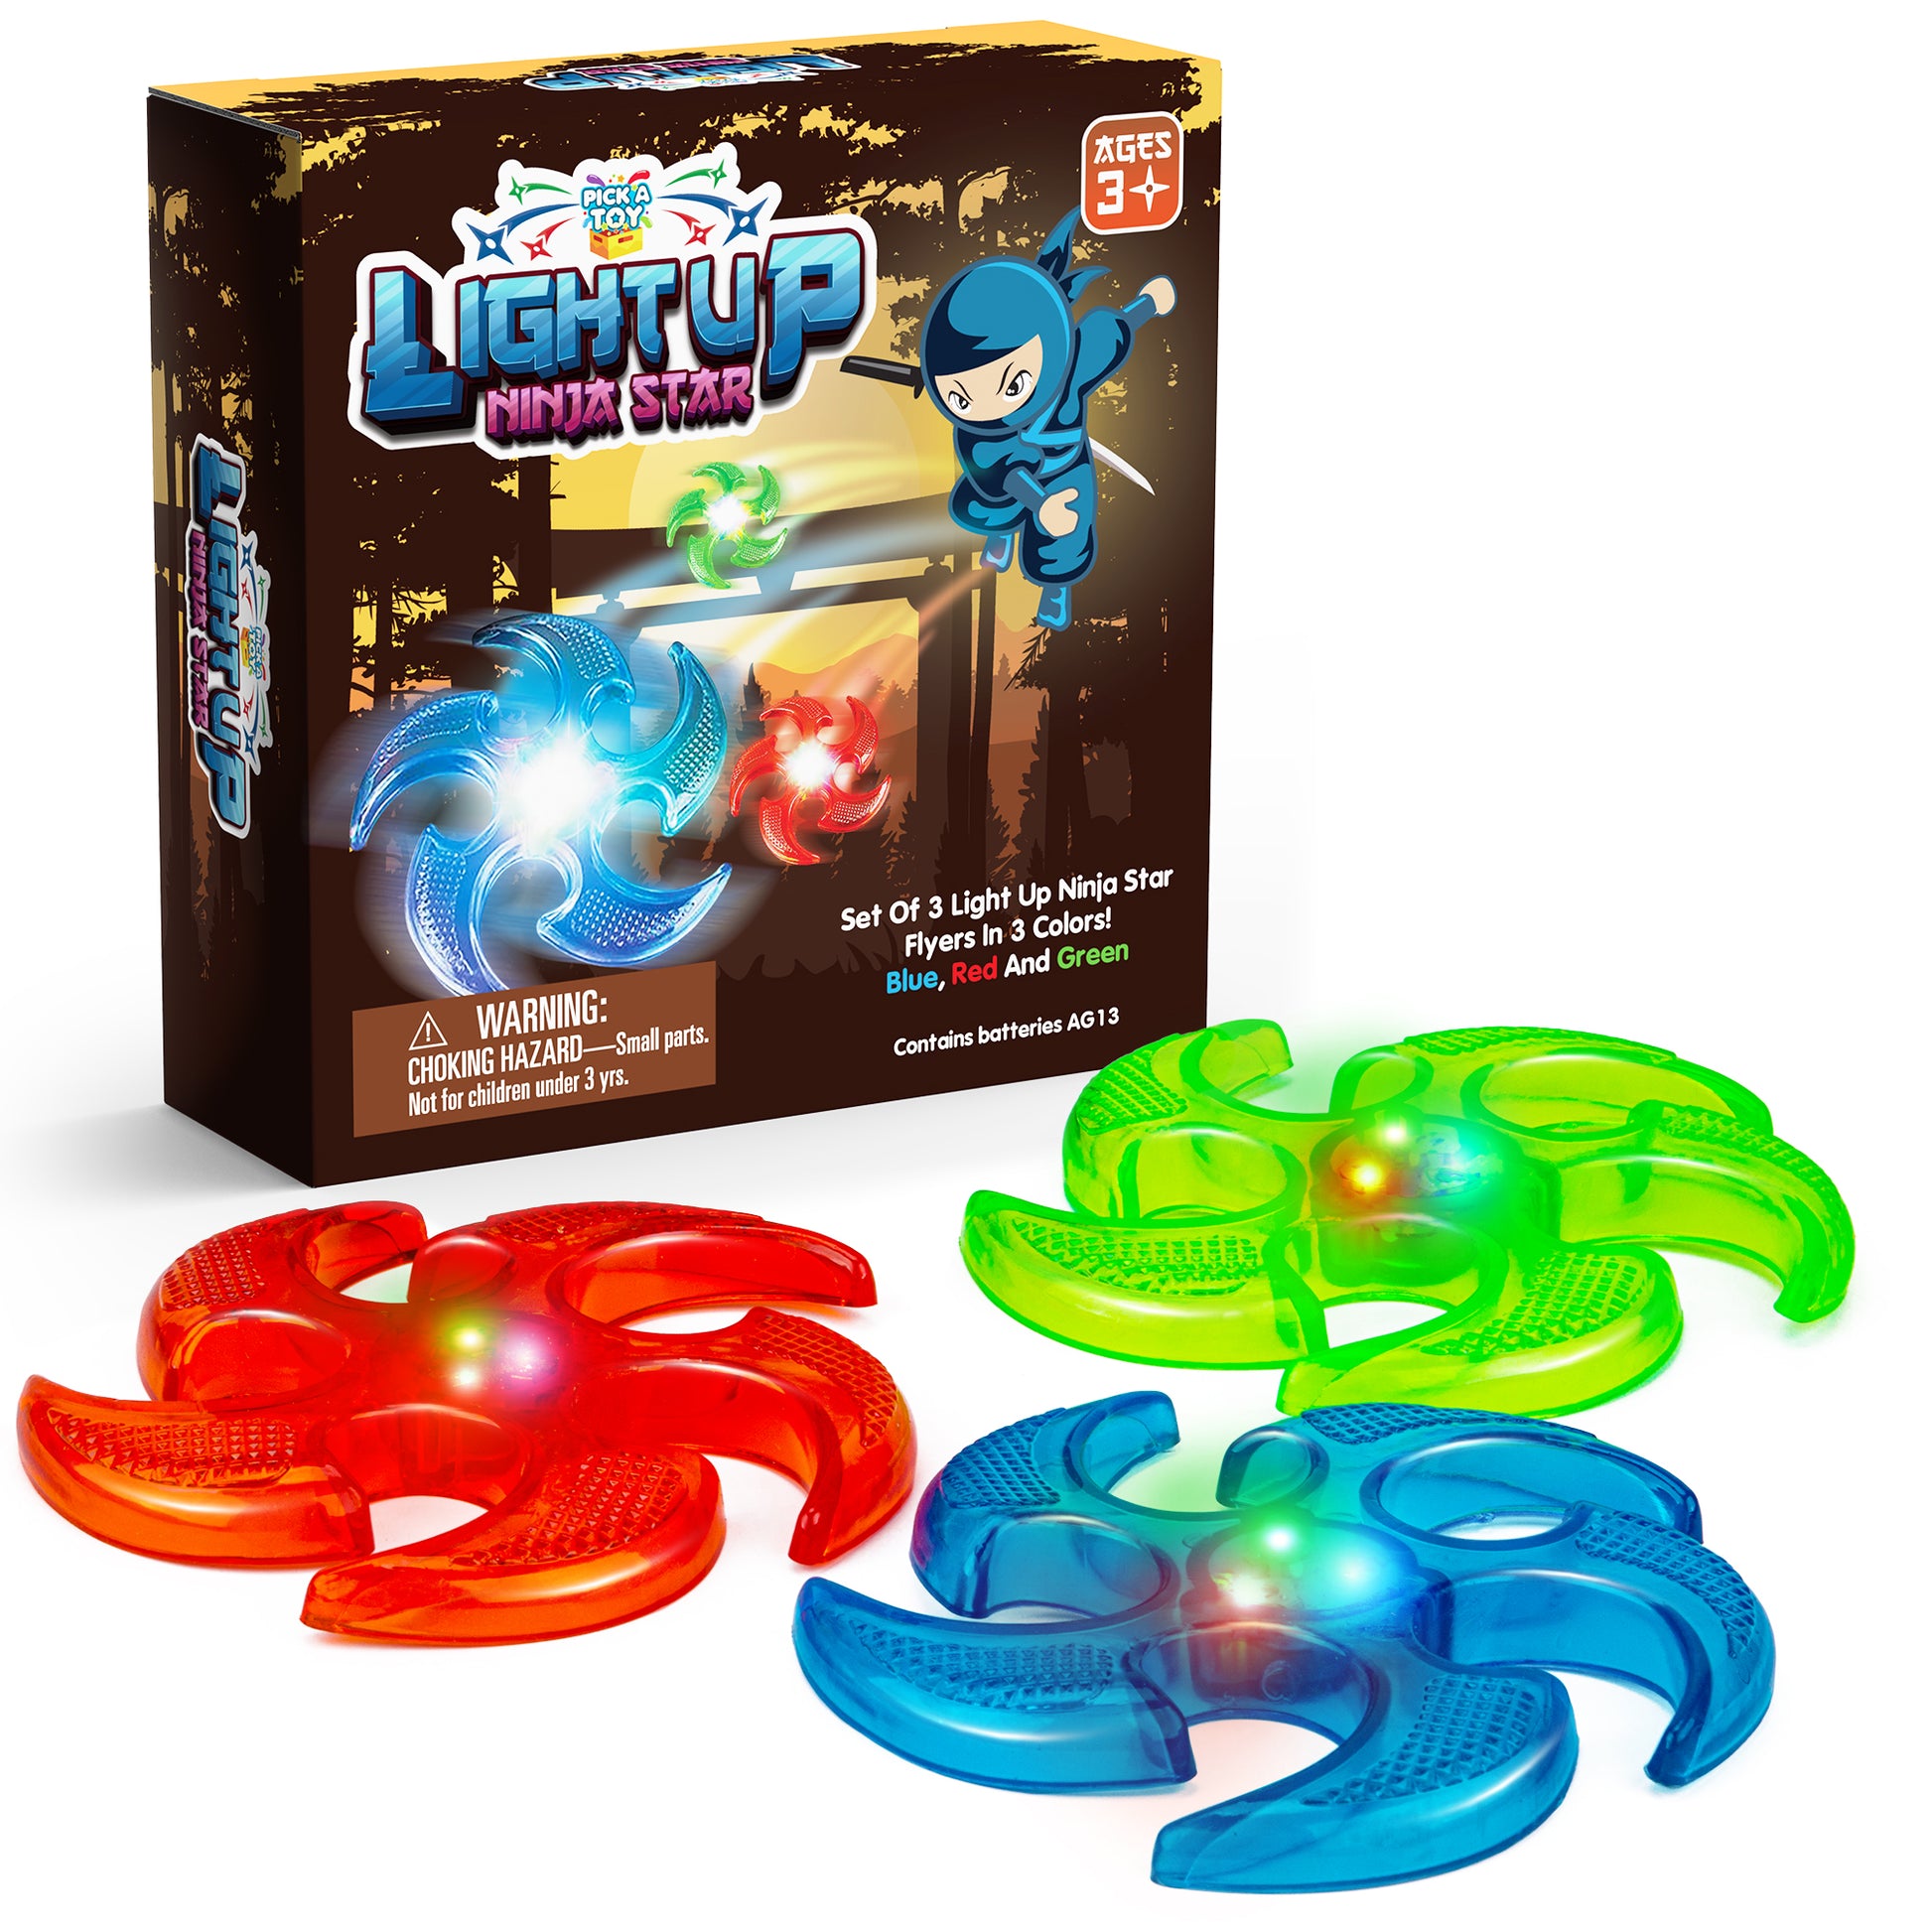 Light Up Ninja Flyers Set, 3 LED Electronic Stars, Heavy Duty Rubber Throwing Discs, Fun and Interactive Kids Toys for Tossing, Games, and Play, 3 Colors, Includes Gift Box - Pick A Toy